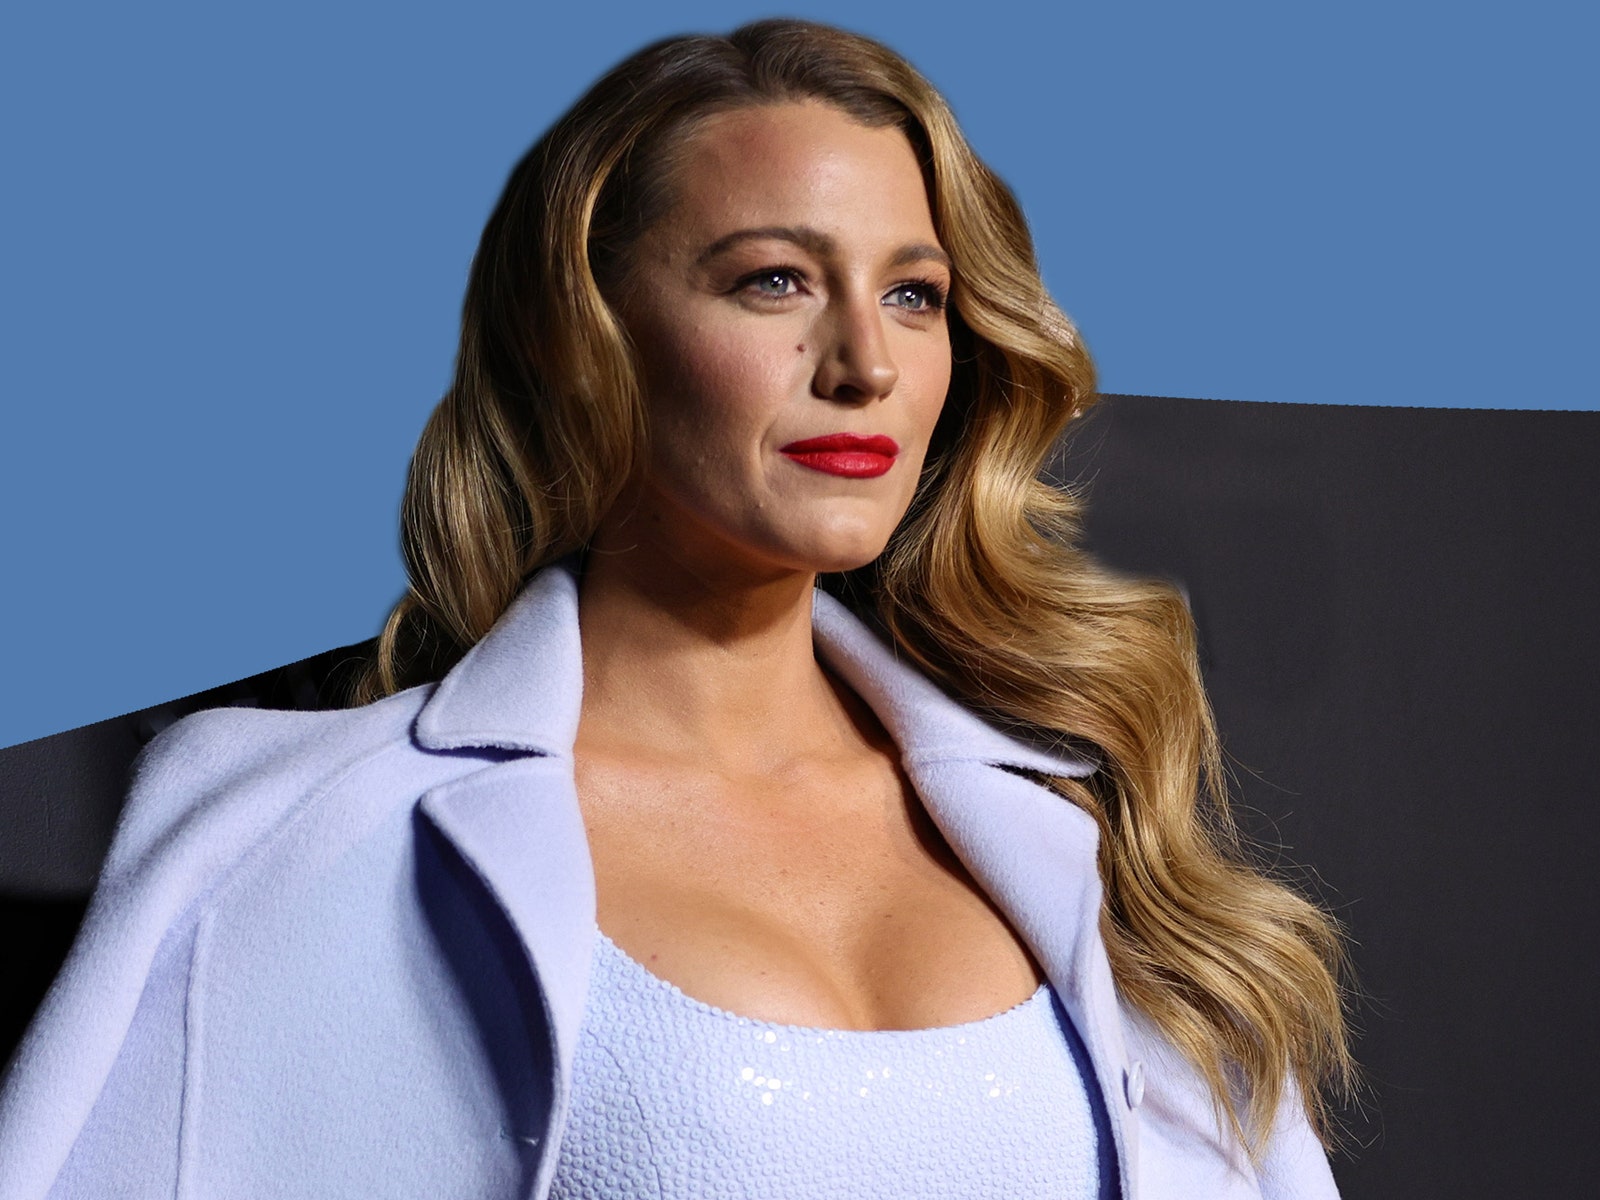 Blake Lively elevated her flirty corset dress with a power-clashing bag